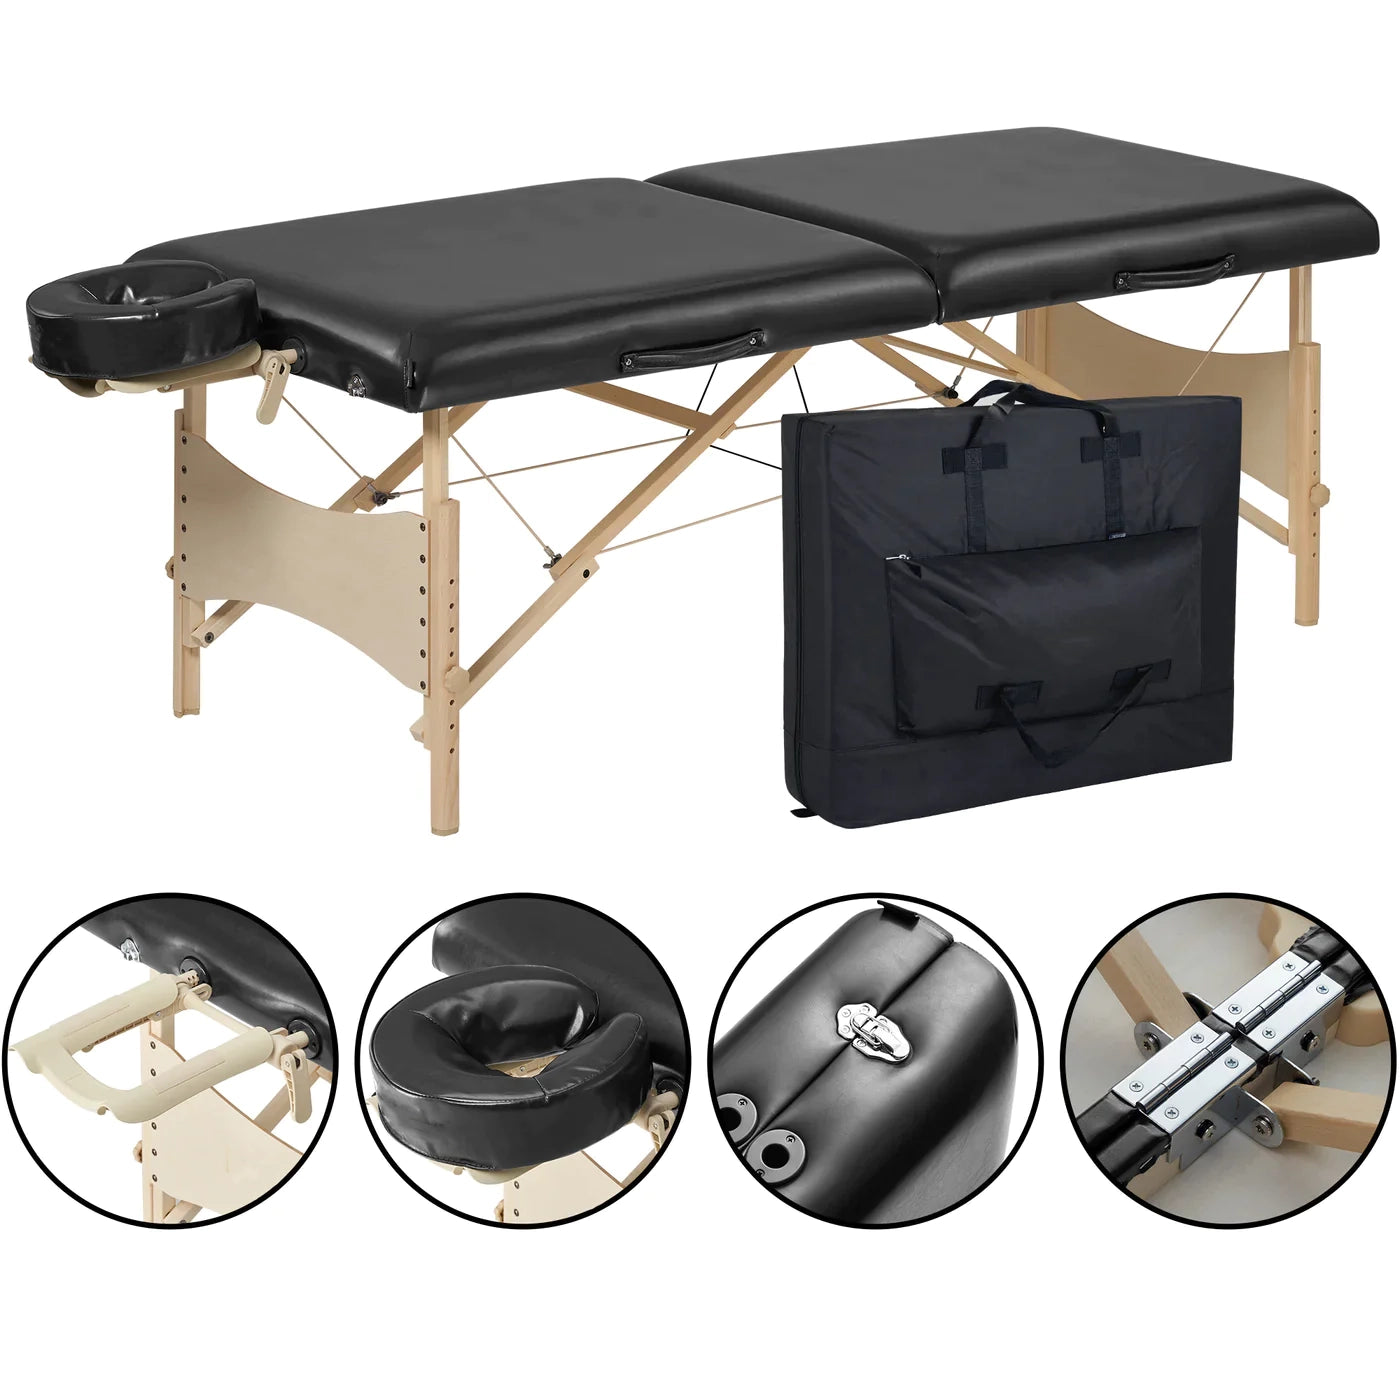 Bella2bello 30" Balboa™ Portable Massage Table NO-Frills Package with Ambient Light